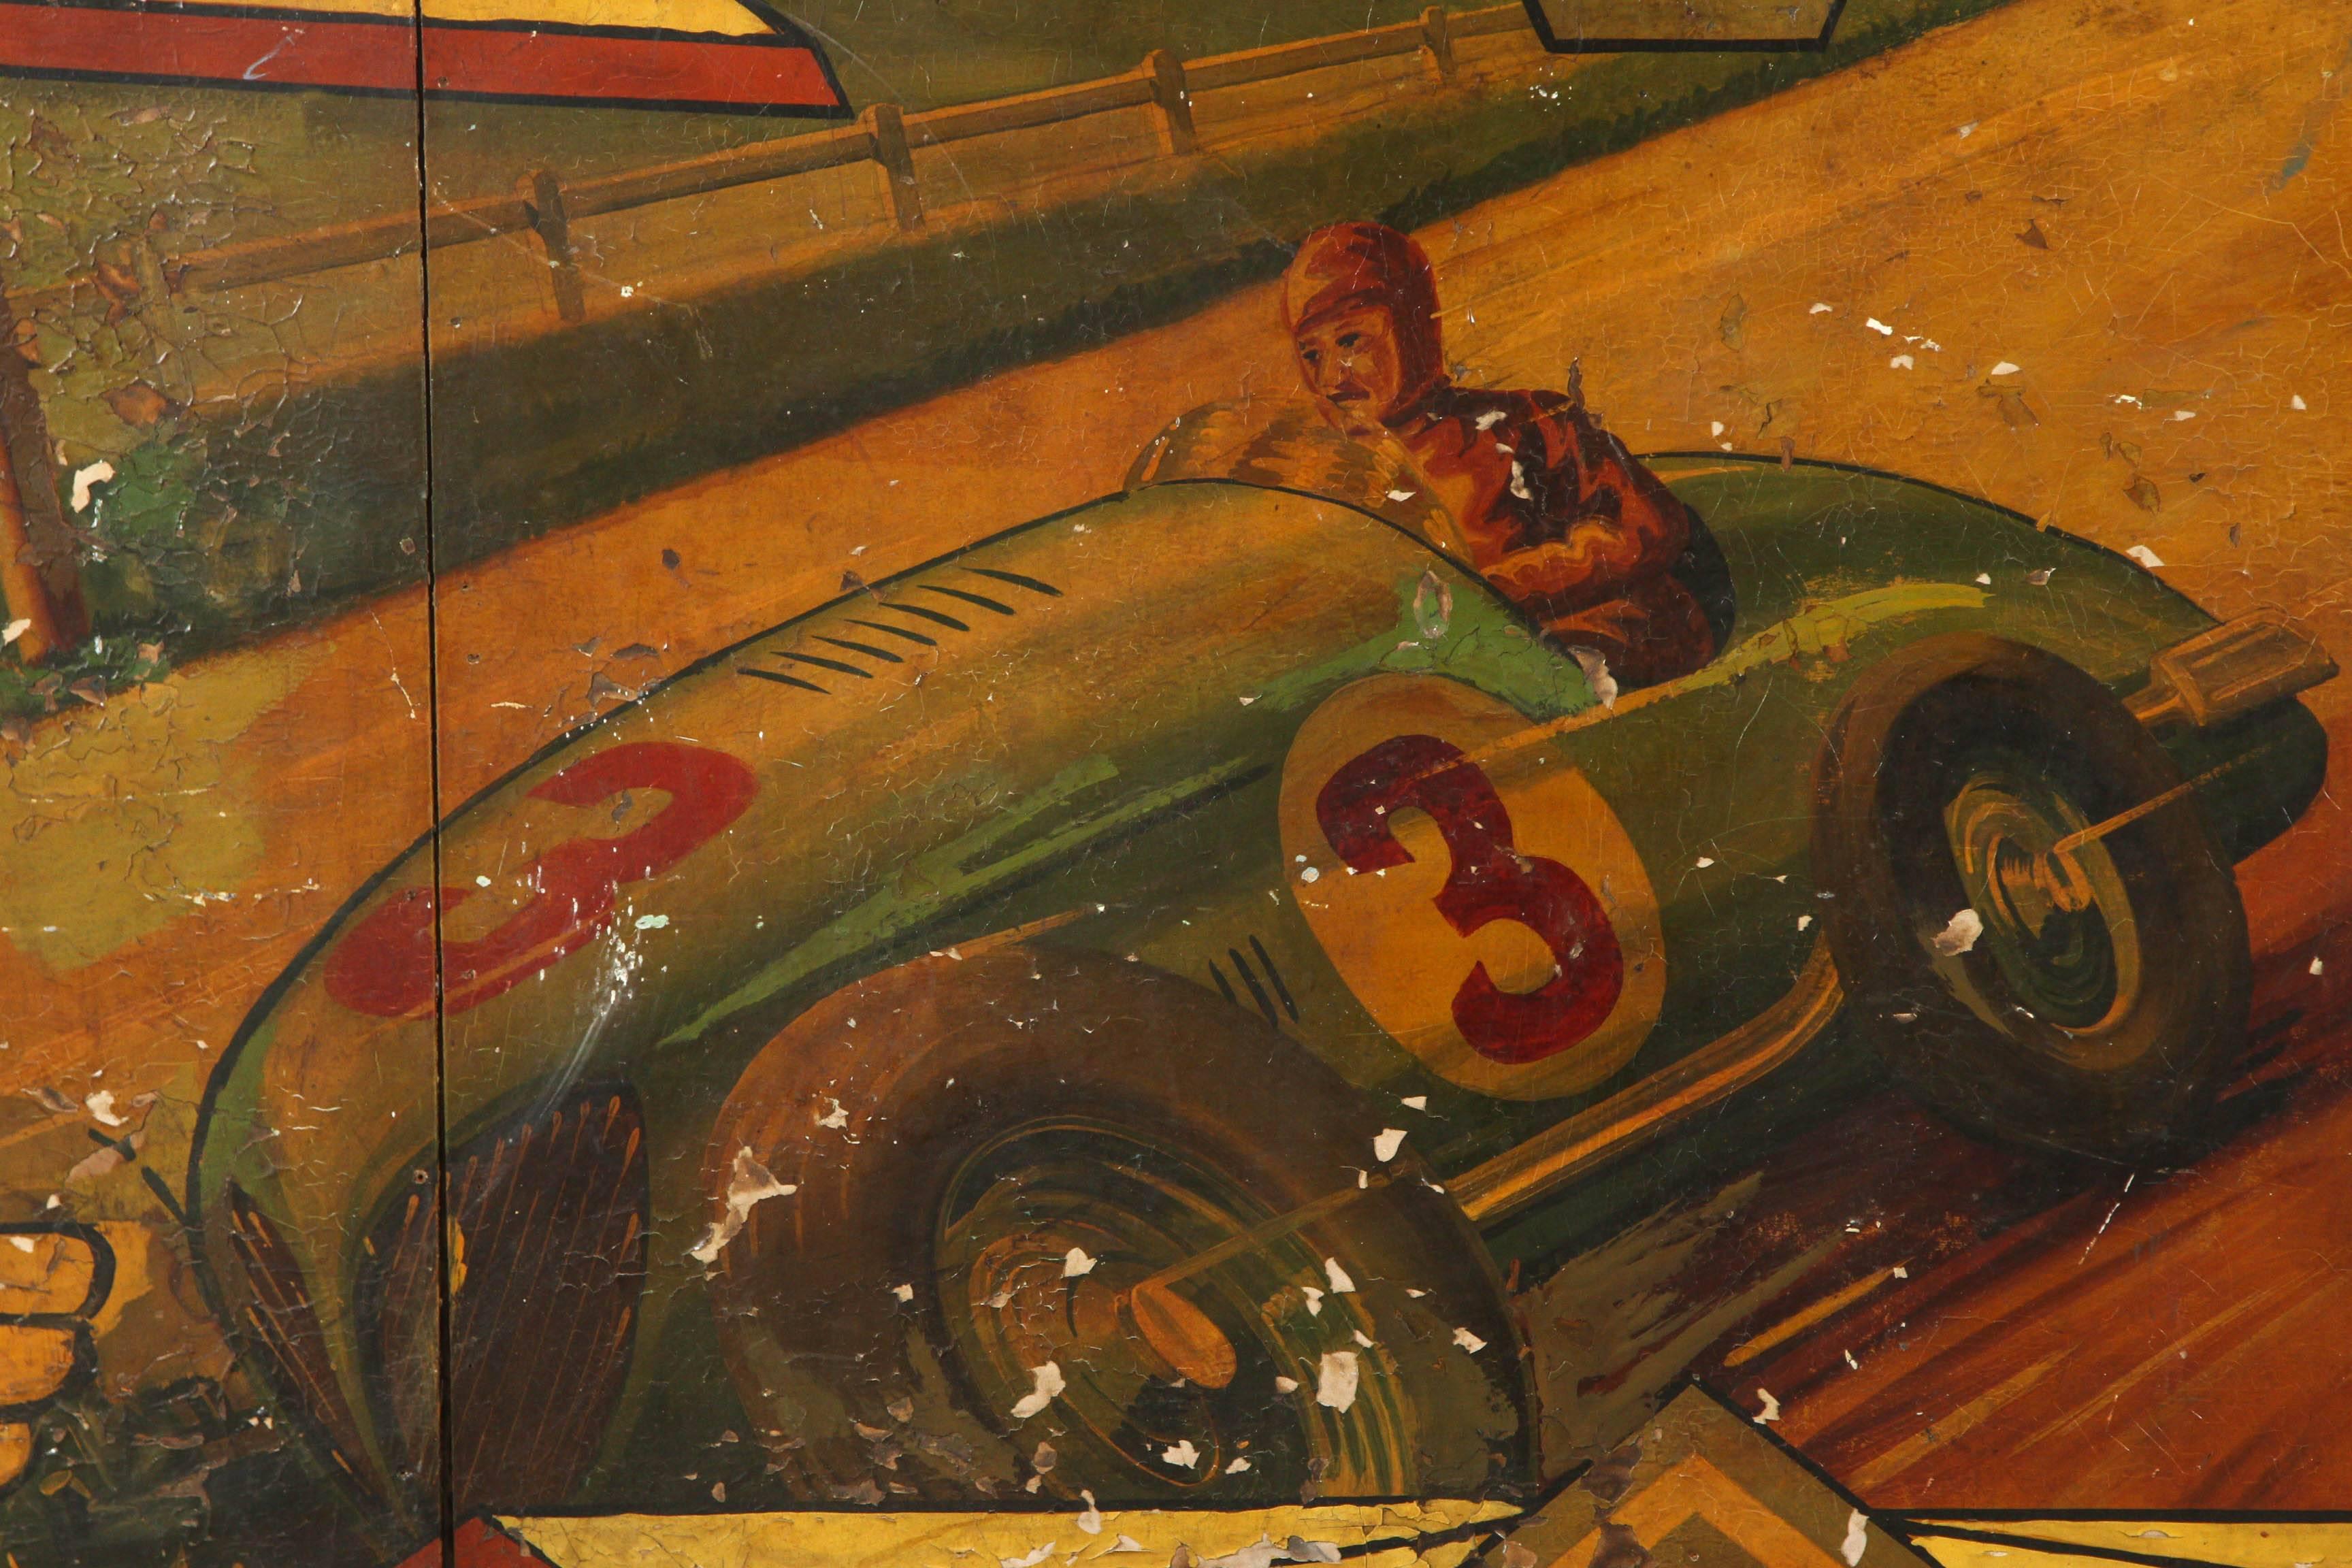 Fantastic early hand-painted carnival rounding board with vintage speedway race cars. Likely made by Spooner in the United Kingdom. This would have been one of a series of panels that would be installed around the upper part of the ride. Please see